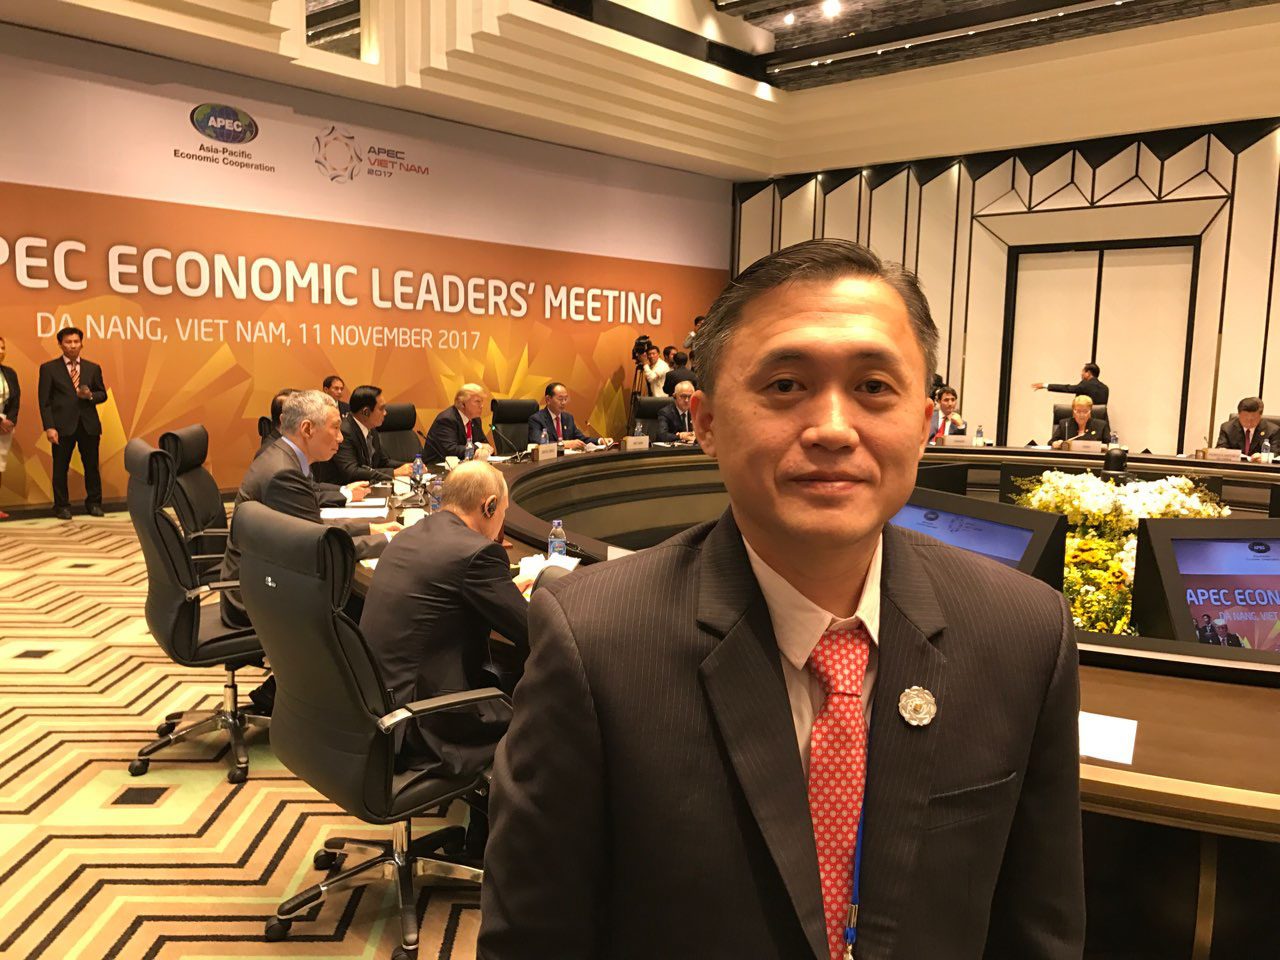 POTUS HERE. SAP Bong Go has a selfie in the APEC event that put US President Donald Trump and Philippine President Rodrigo Duterte in the same room for the first time. 